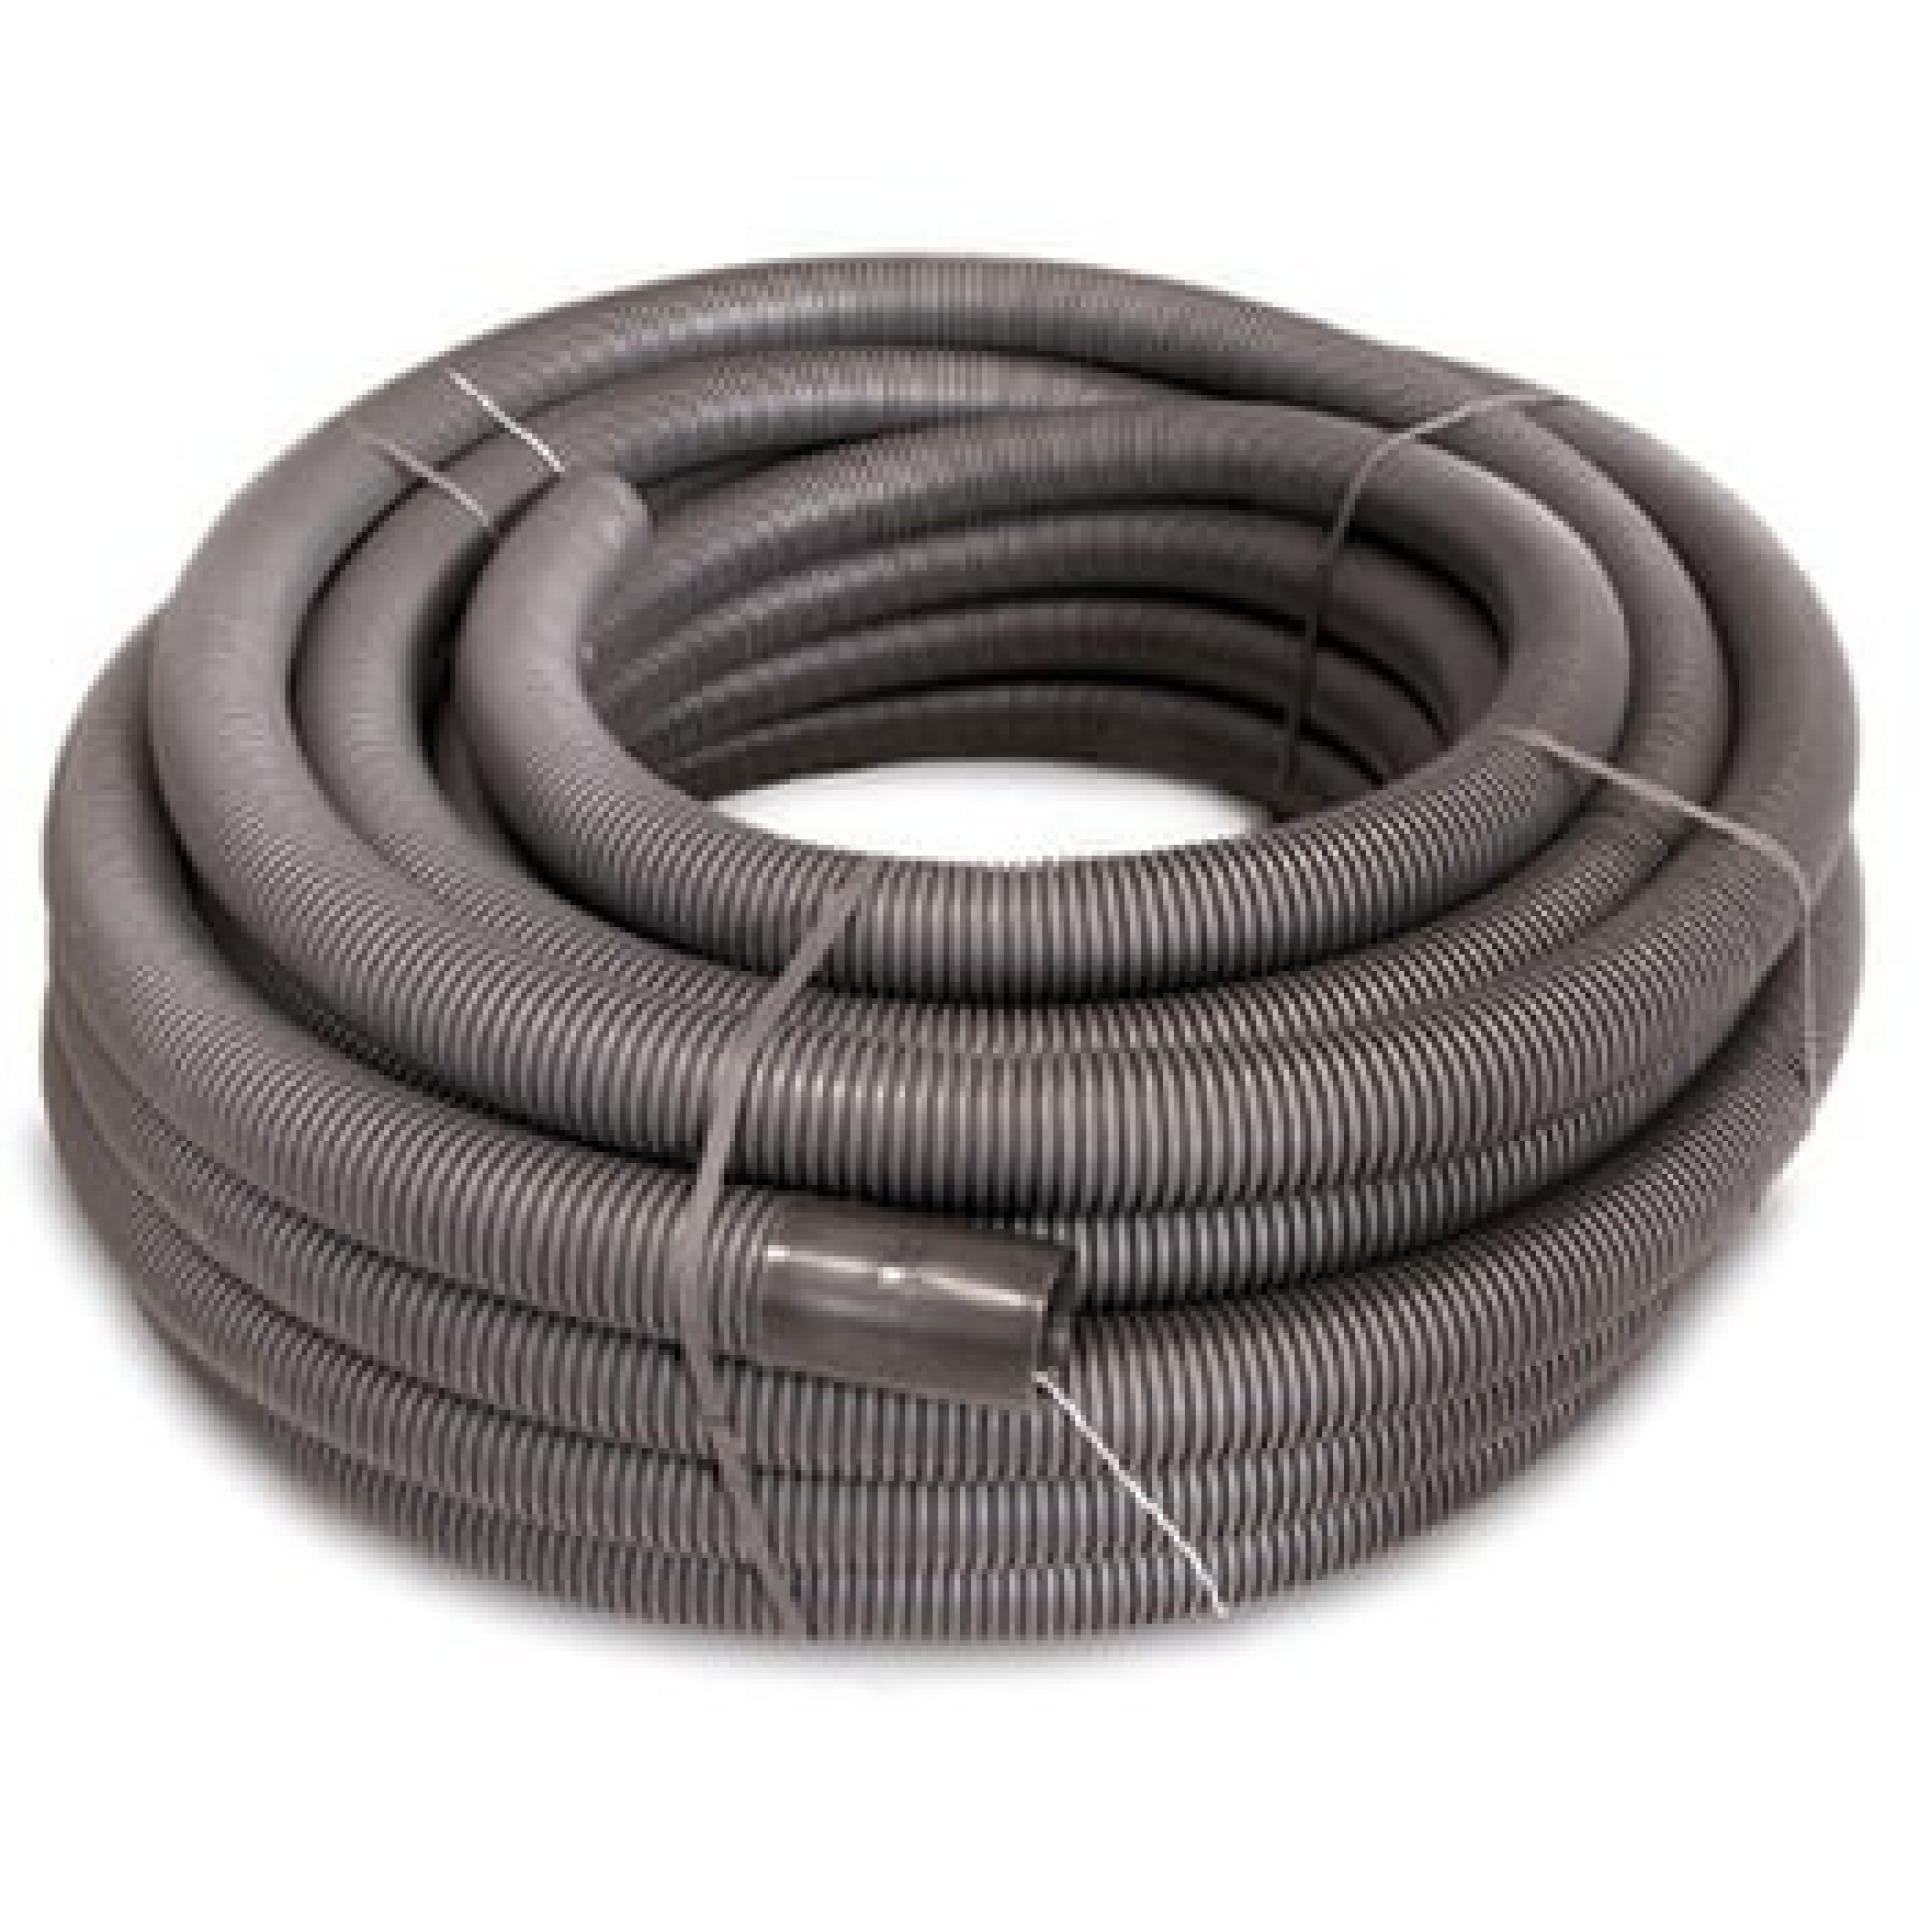 Flexible Conduit 110mm halogenfree, dobb wall, with draw-in wire black